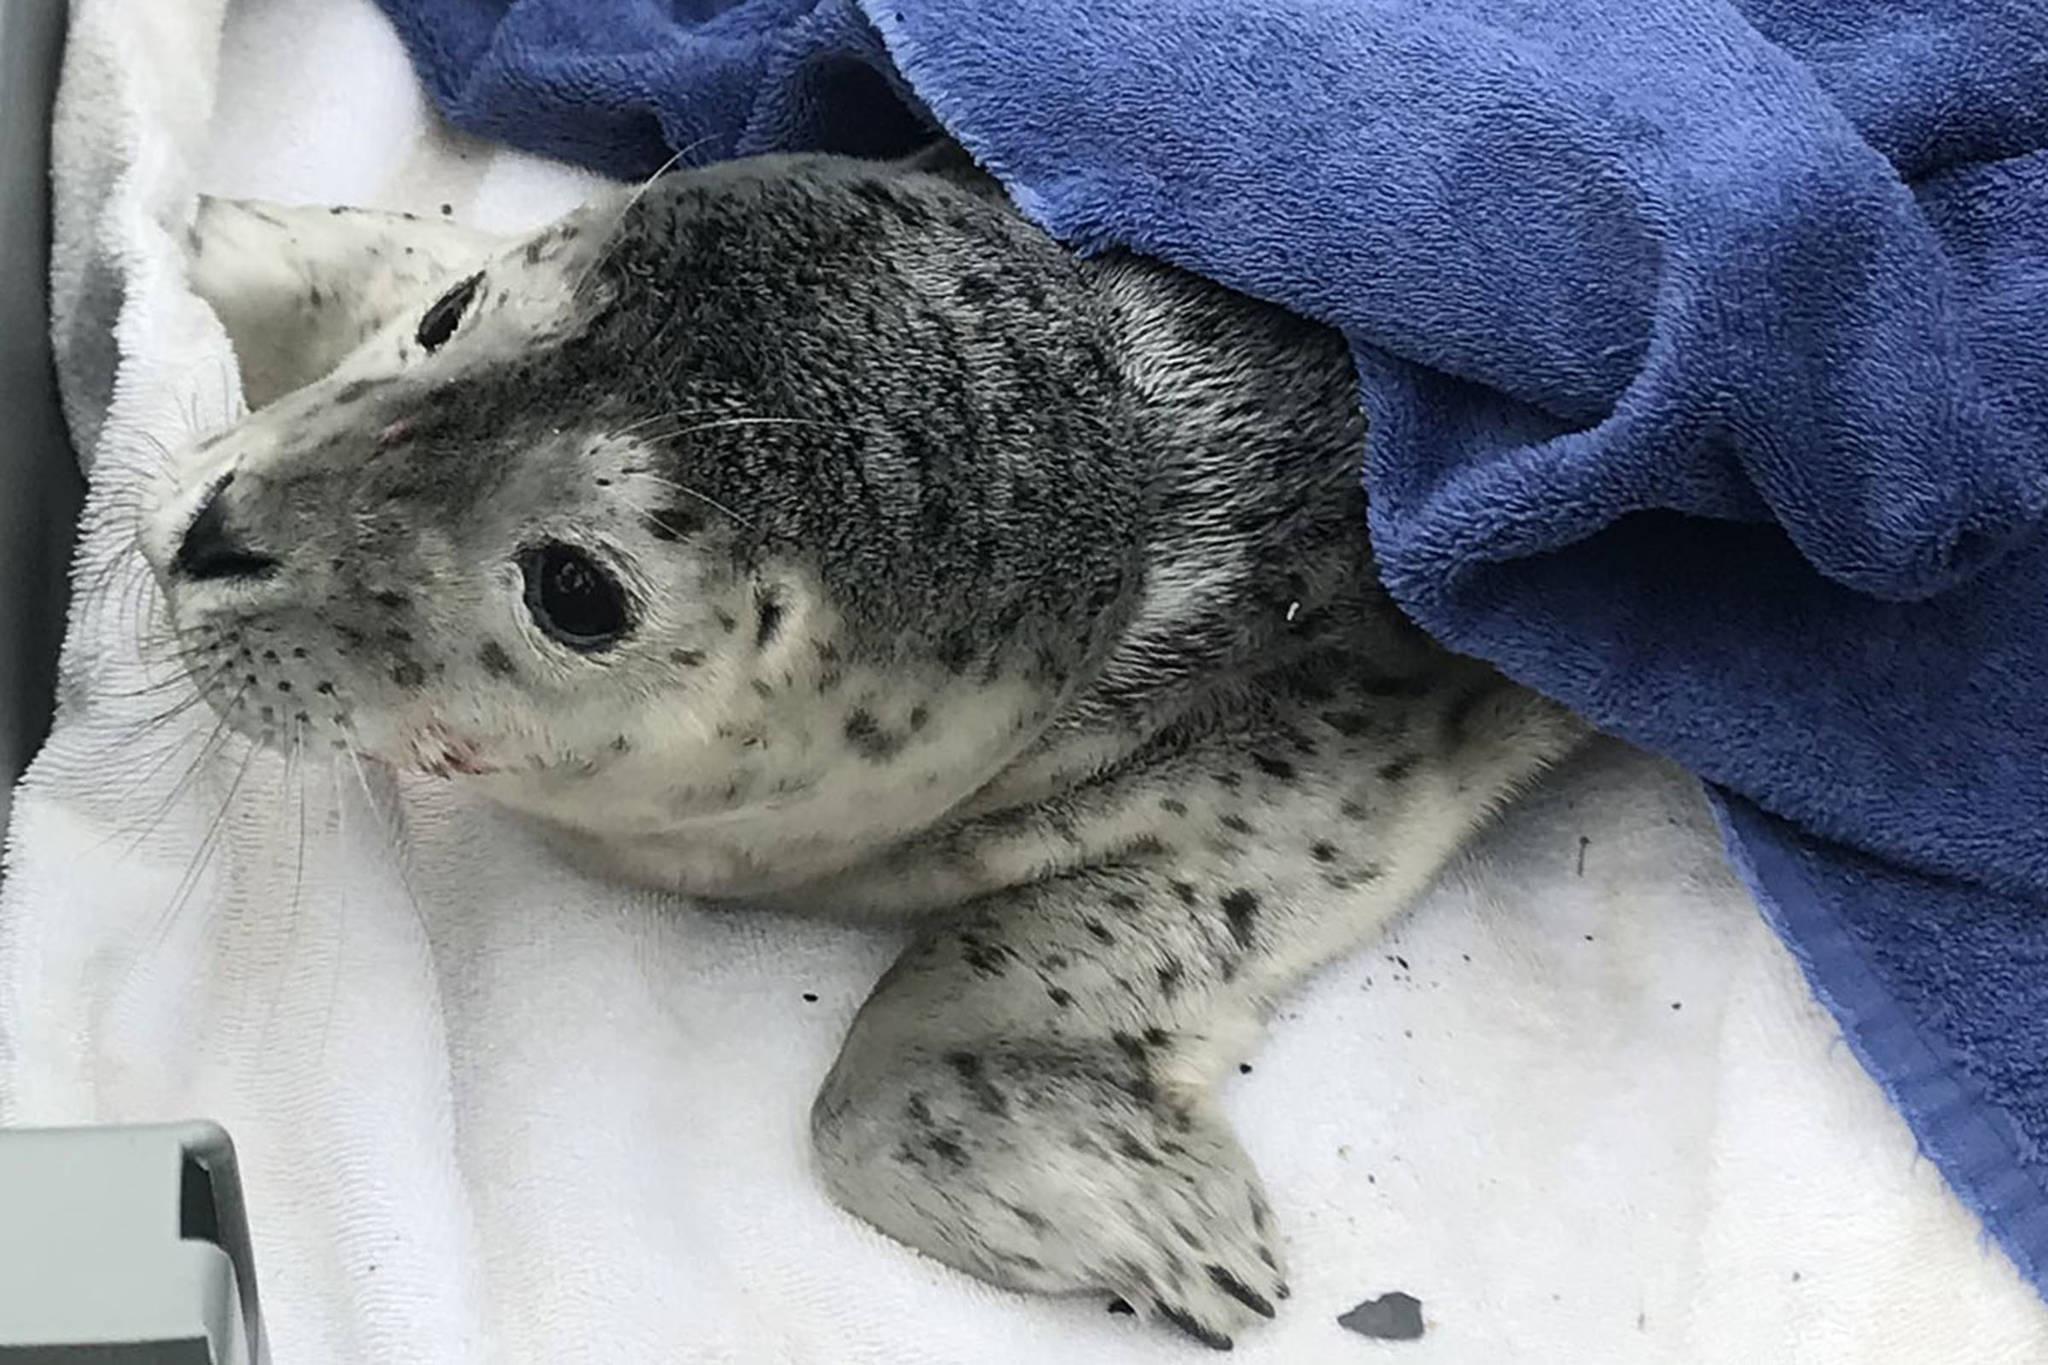 A distressed harbor seal pup suffered injuries to its face but was recovered at Auke Bay Wednesday morning. (Courtesy Photo | NOAA Fisheries)